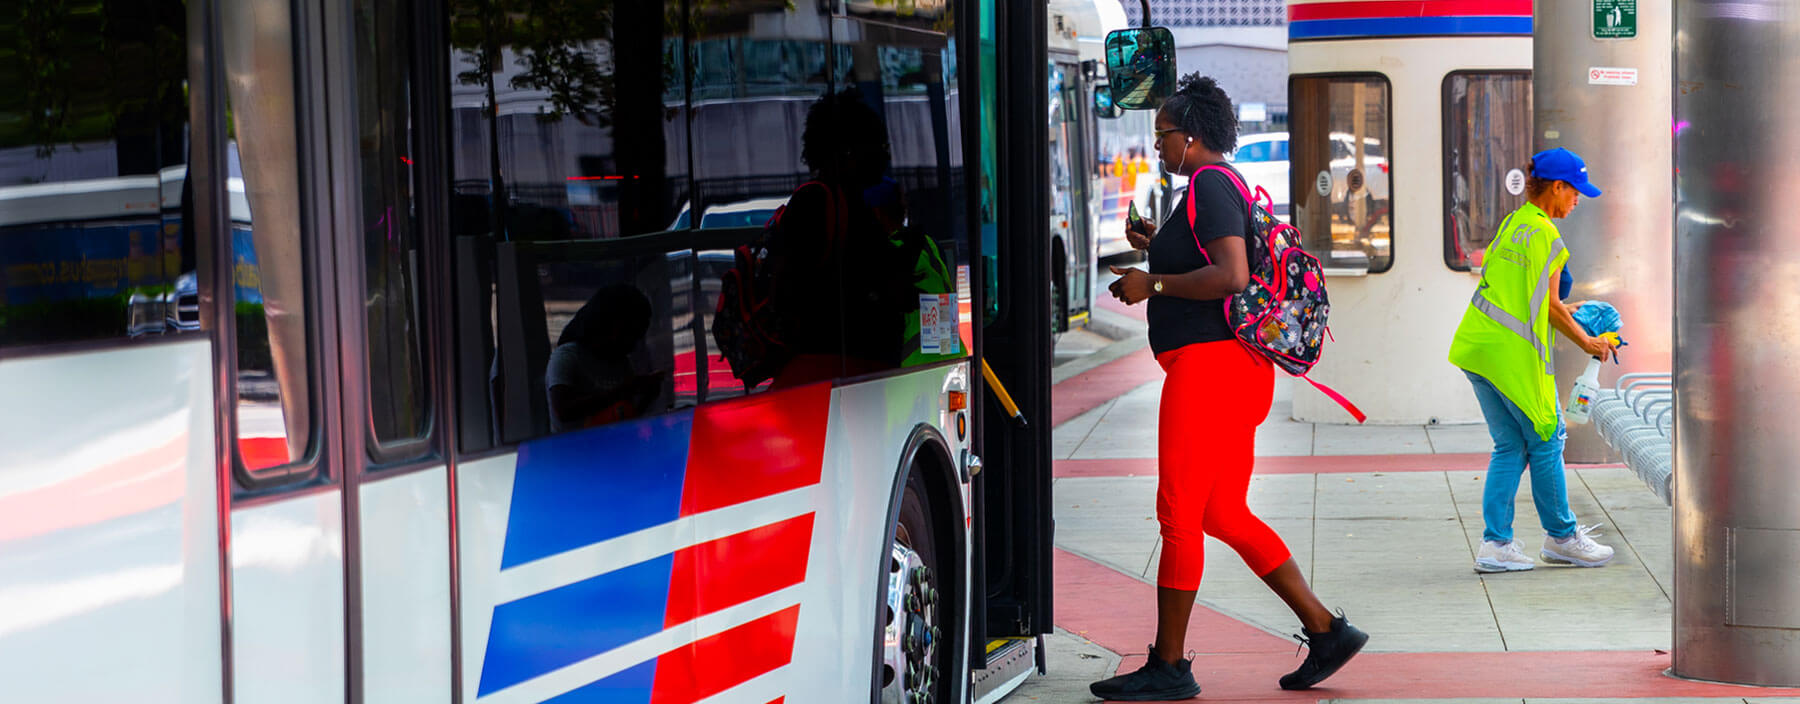 Woman stepping onboard a local bus at a transit center.